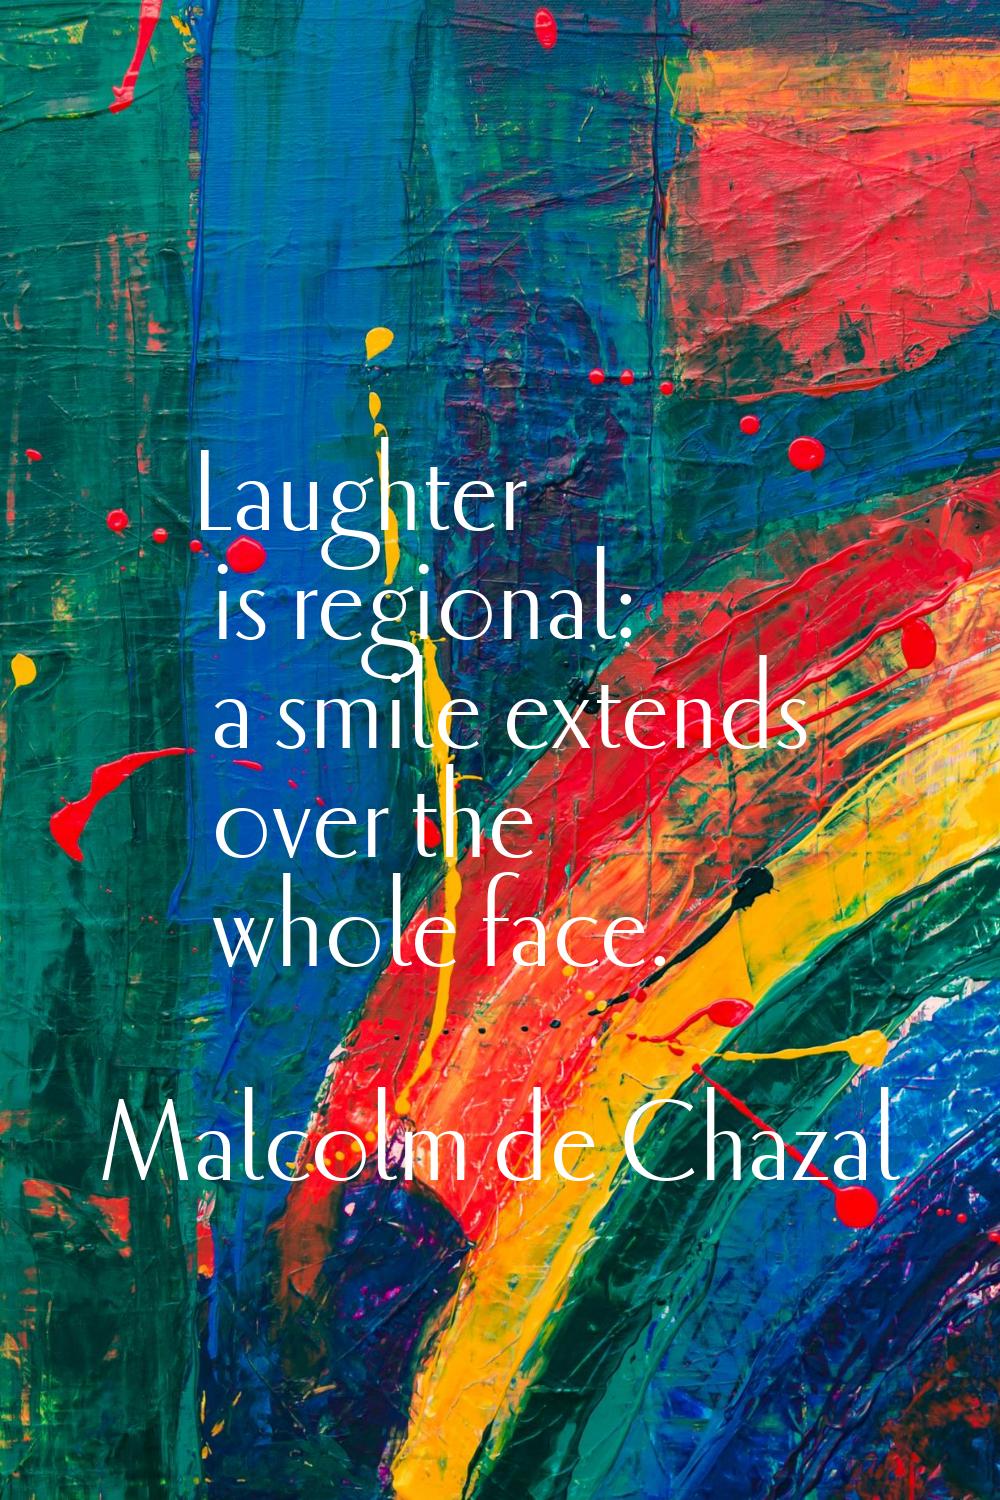 Laughter is regional: a smile extends over the whole face.